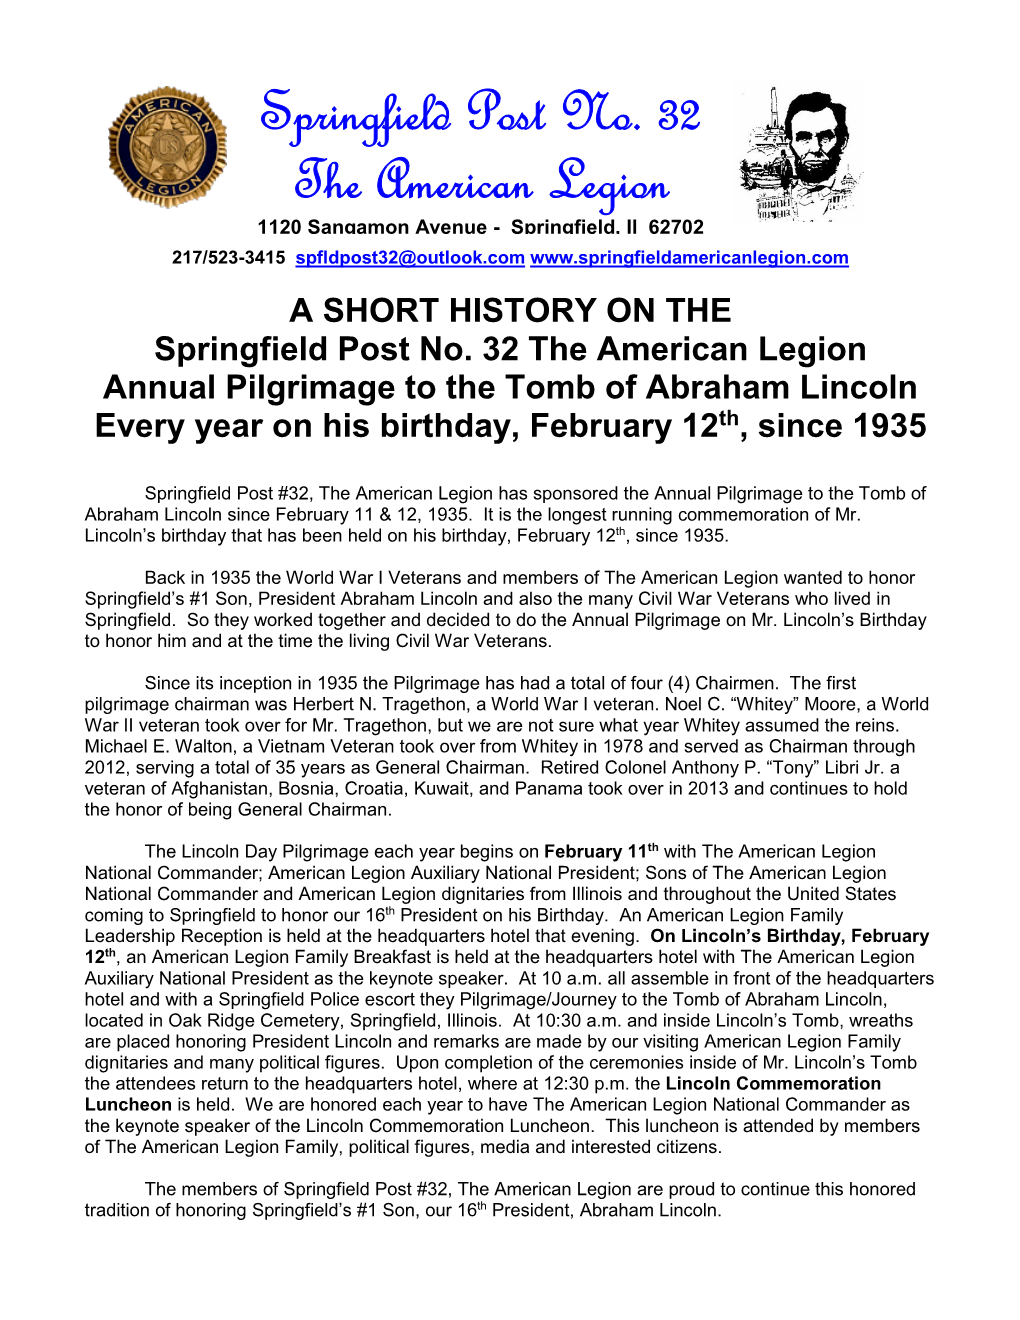 Springfield Post No. 32 the American Legion Annual Pilgrimage to the Tomb of Abraham Lincoln Every Year on His Birthday, February 12Th, Since 1935